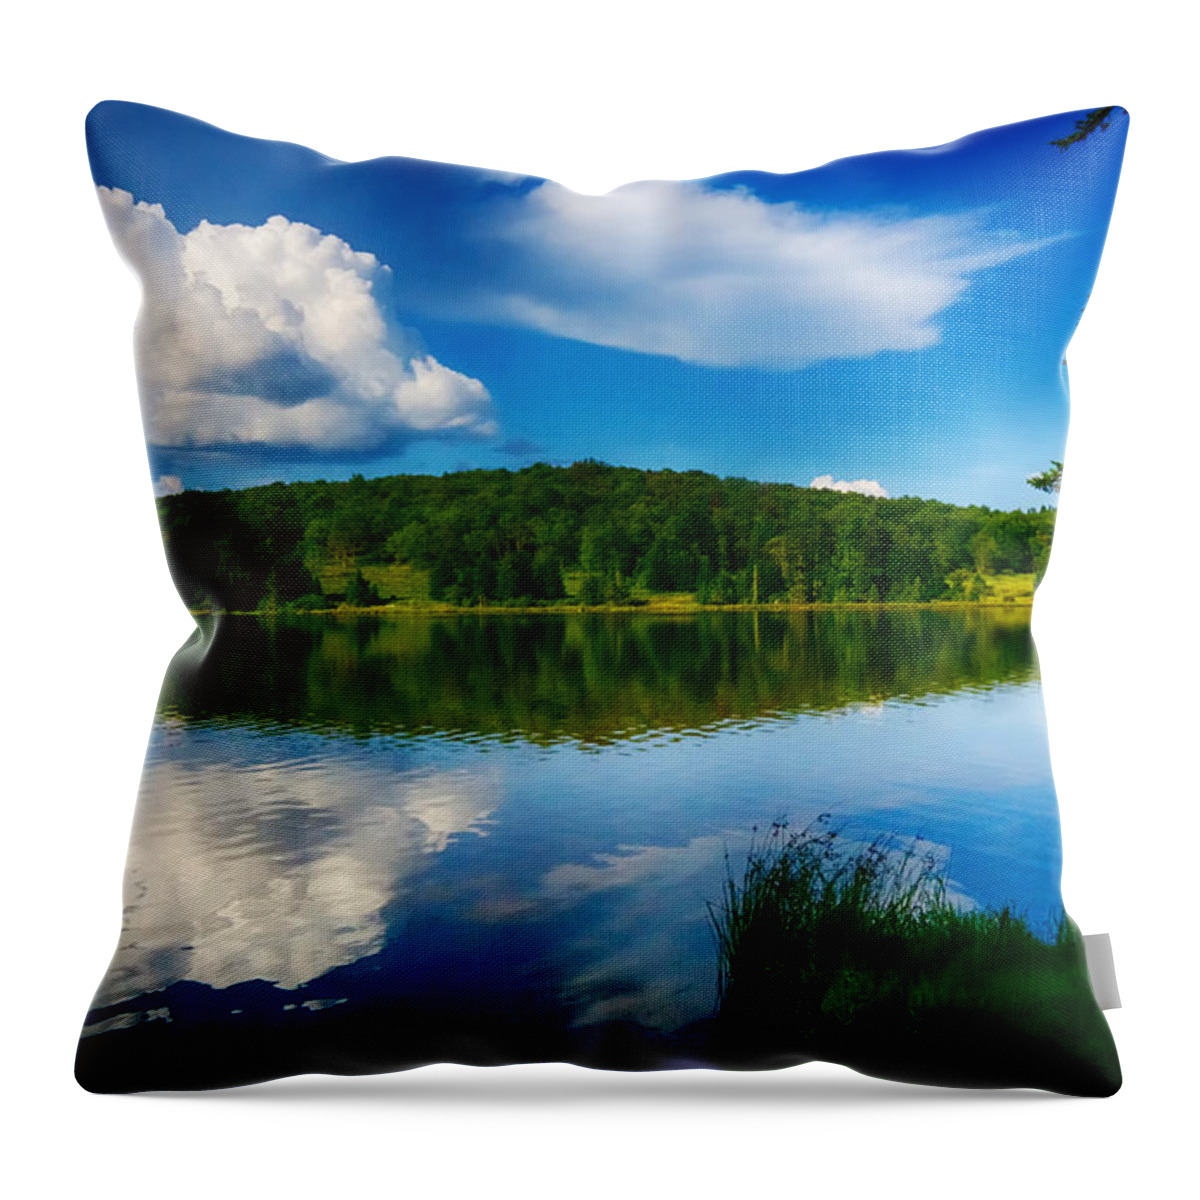 Evening Throw Pillow featuring the photograph Summer On the Lake by Amanda Jones